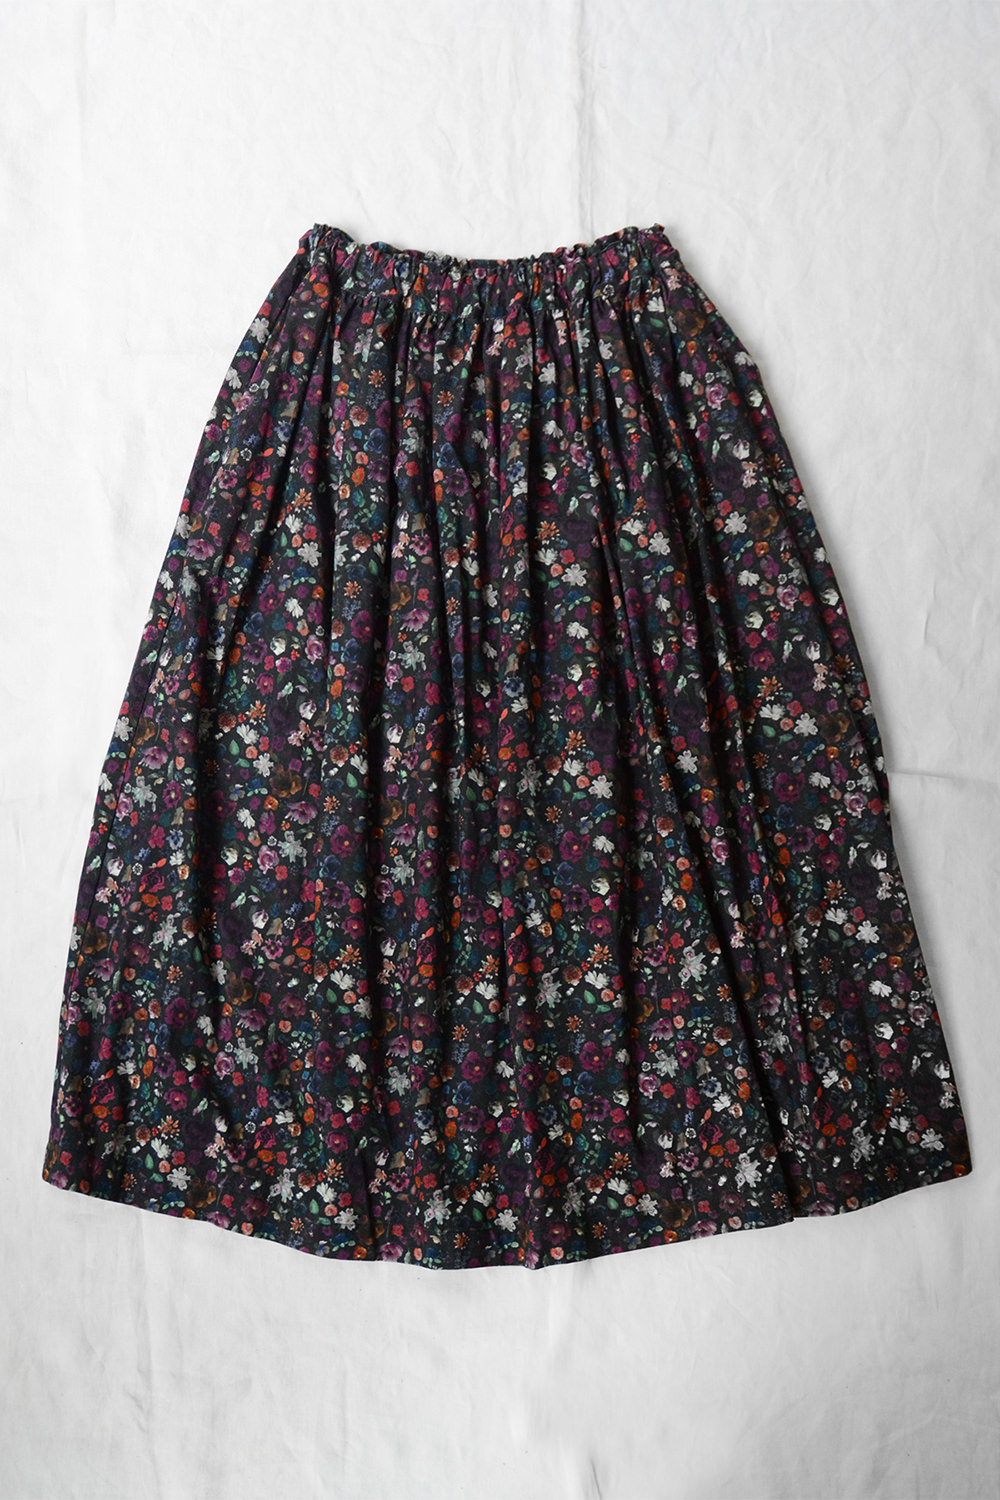 makie corduroy skirt grace floral top picture